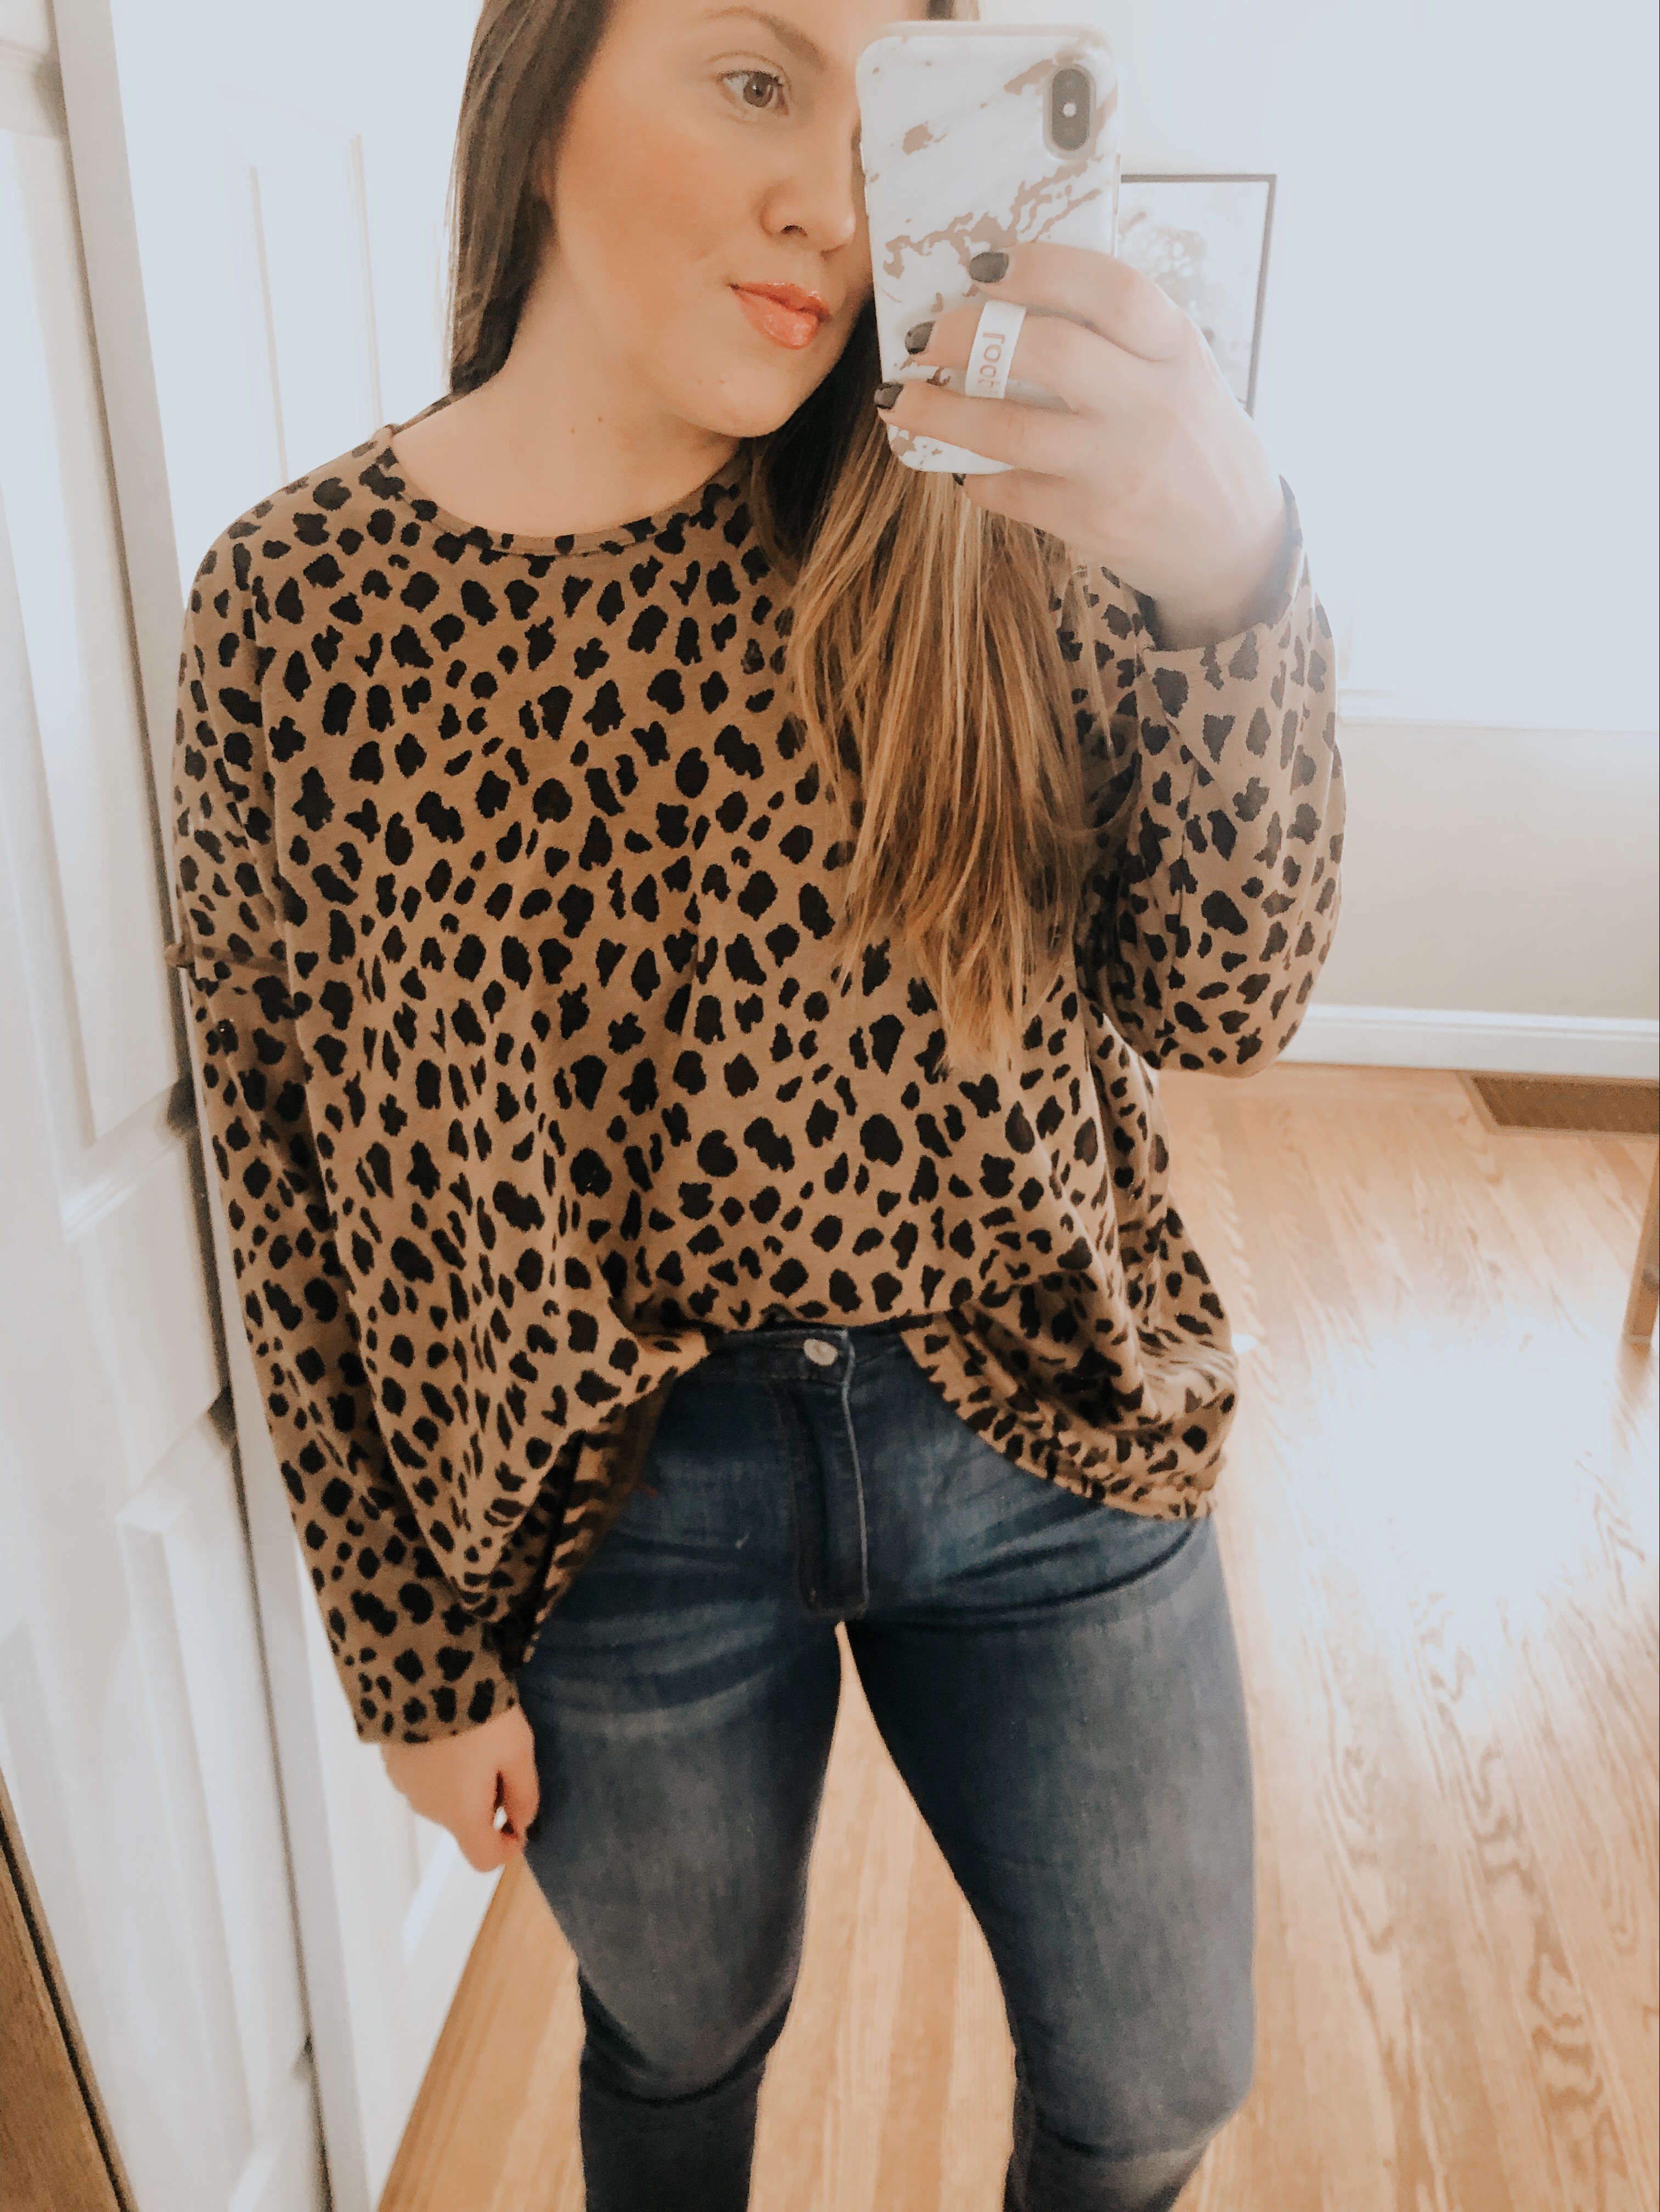 San Francisco blogger, Ashley Zeal, from Two Peas in a Prada shares her February Vici Try On Session. She is sharing all the fun spring staples from Vici. 